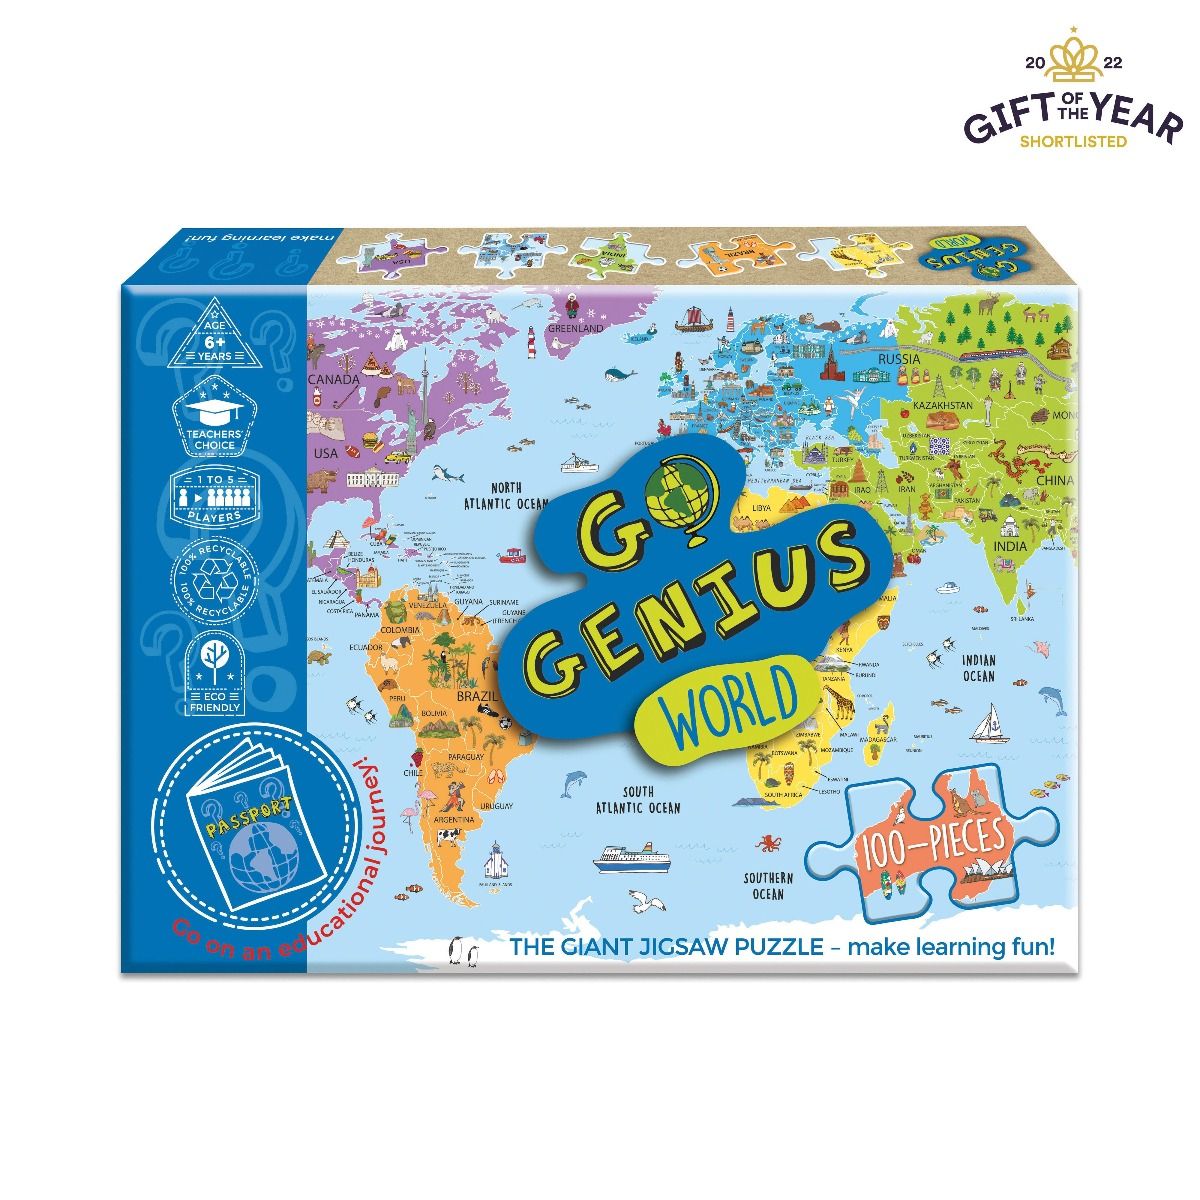 Go Genius World - The Giant Jigsaw Puzzle - Gifts R Us